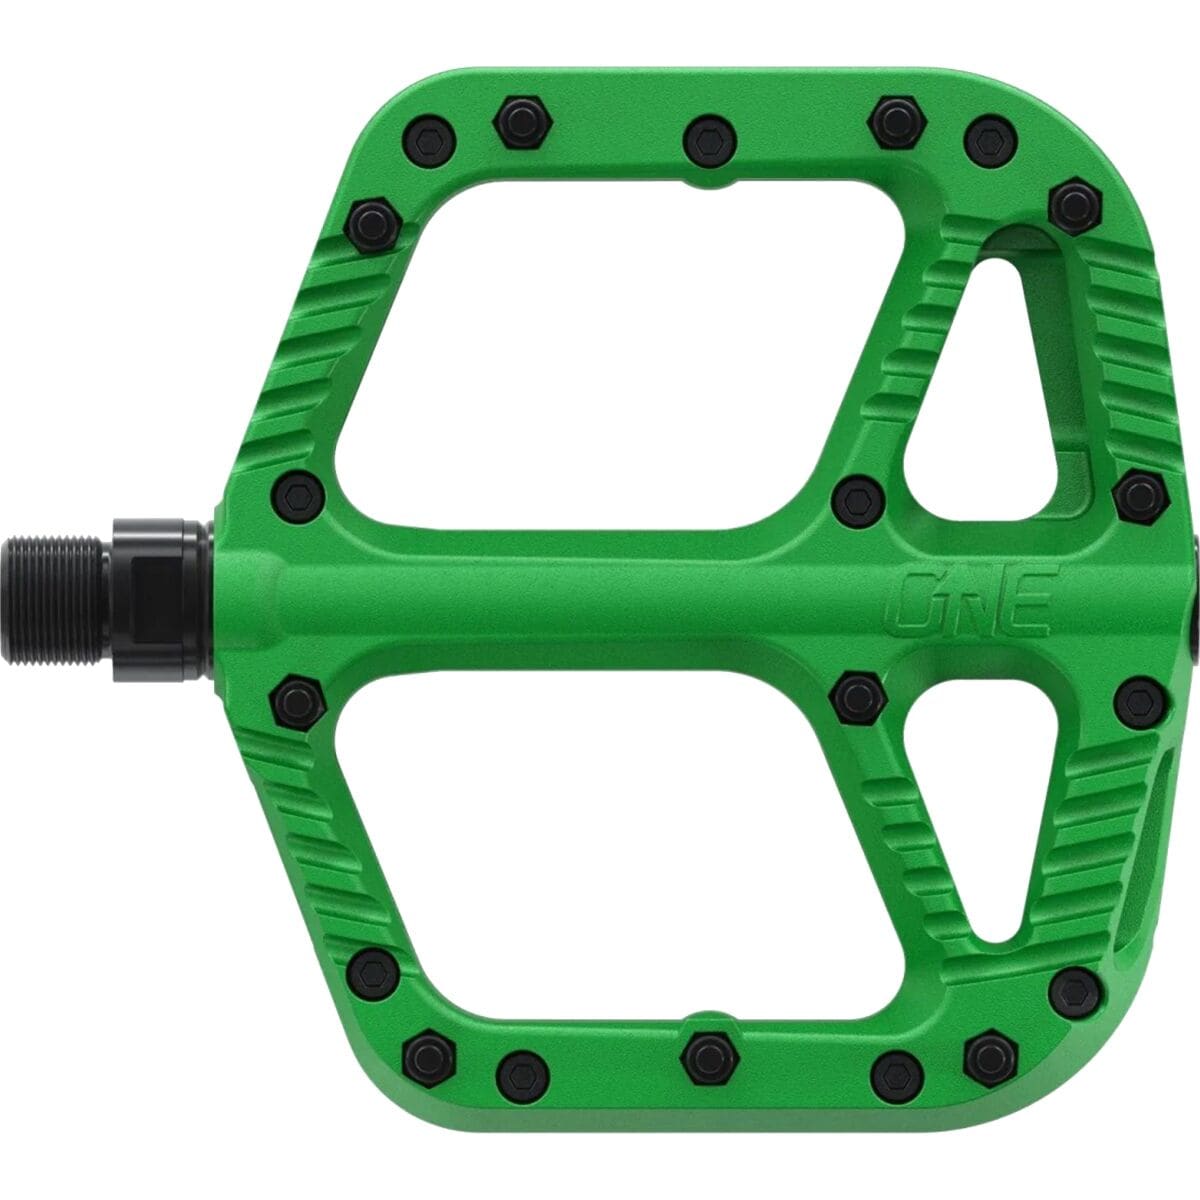 OneUp Components Composite Pedal Green, One Size